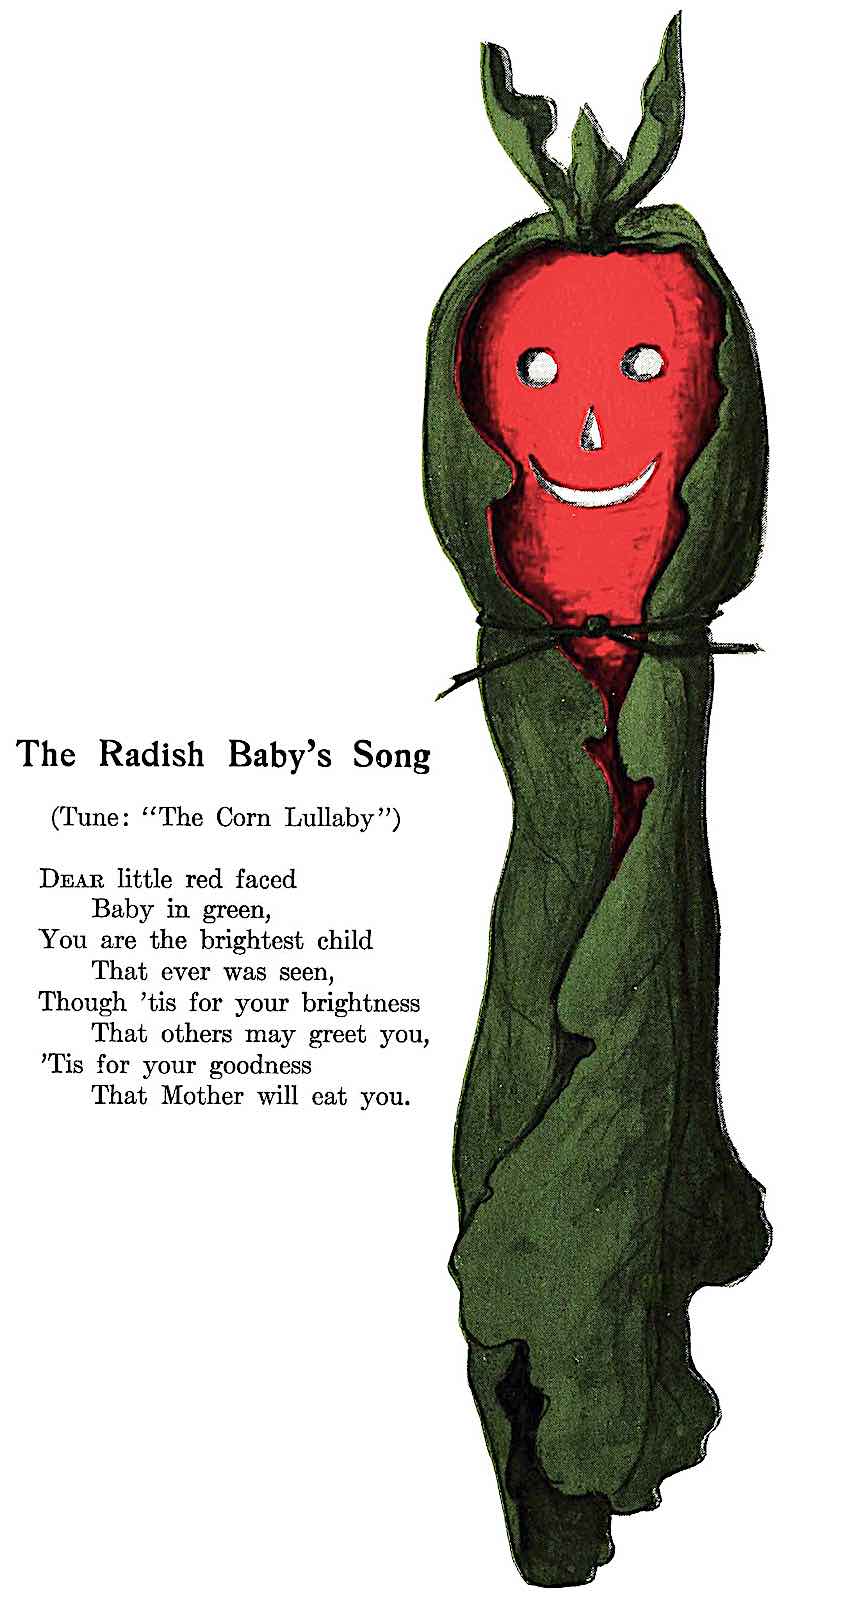 a 1906 home made Radish Baby toy